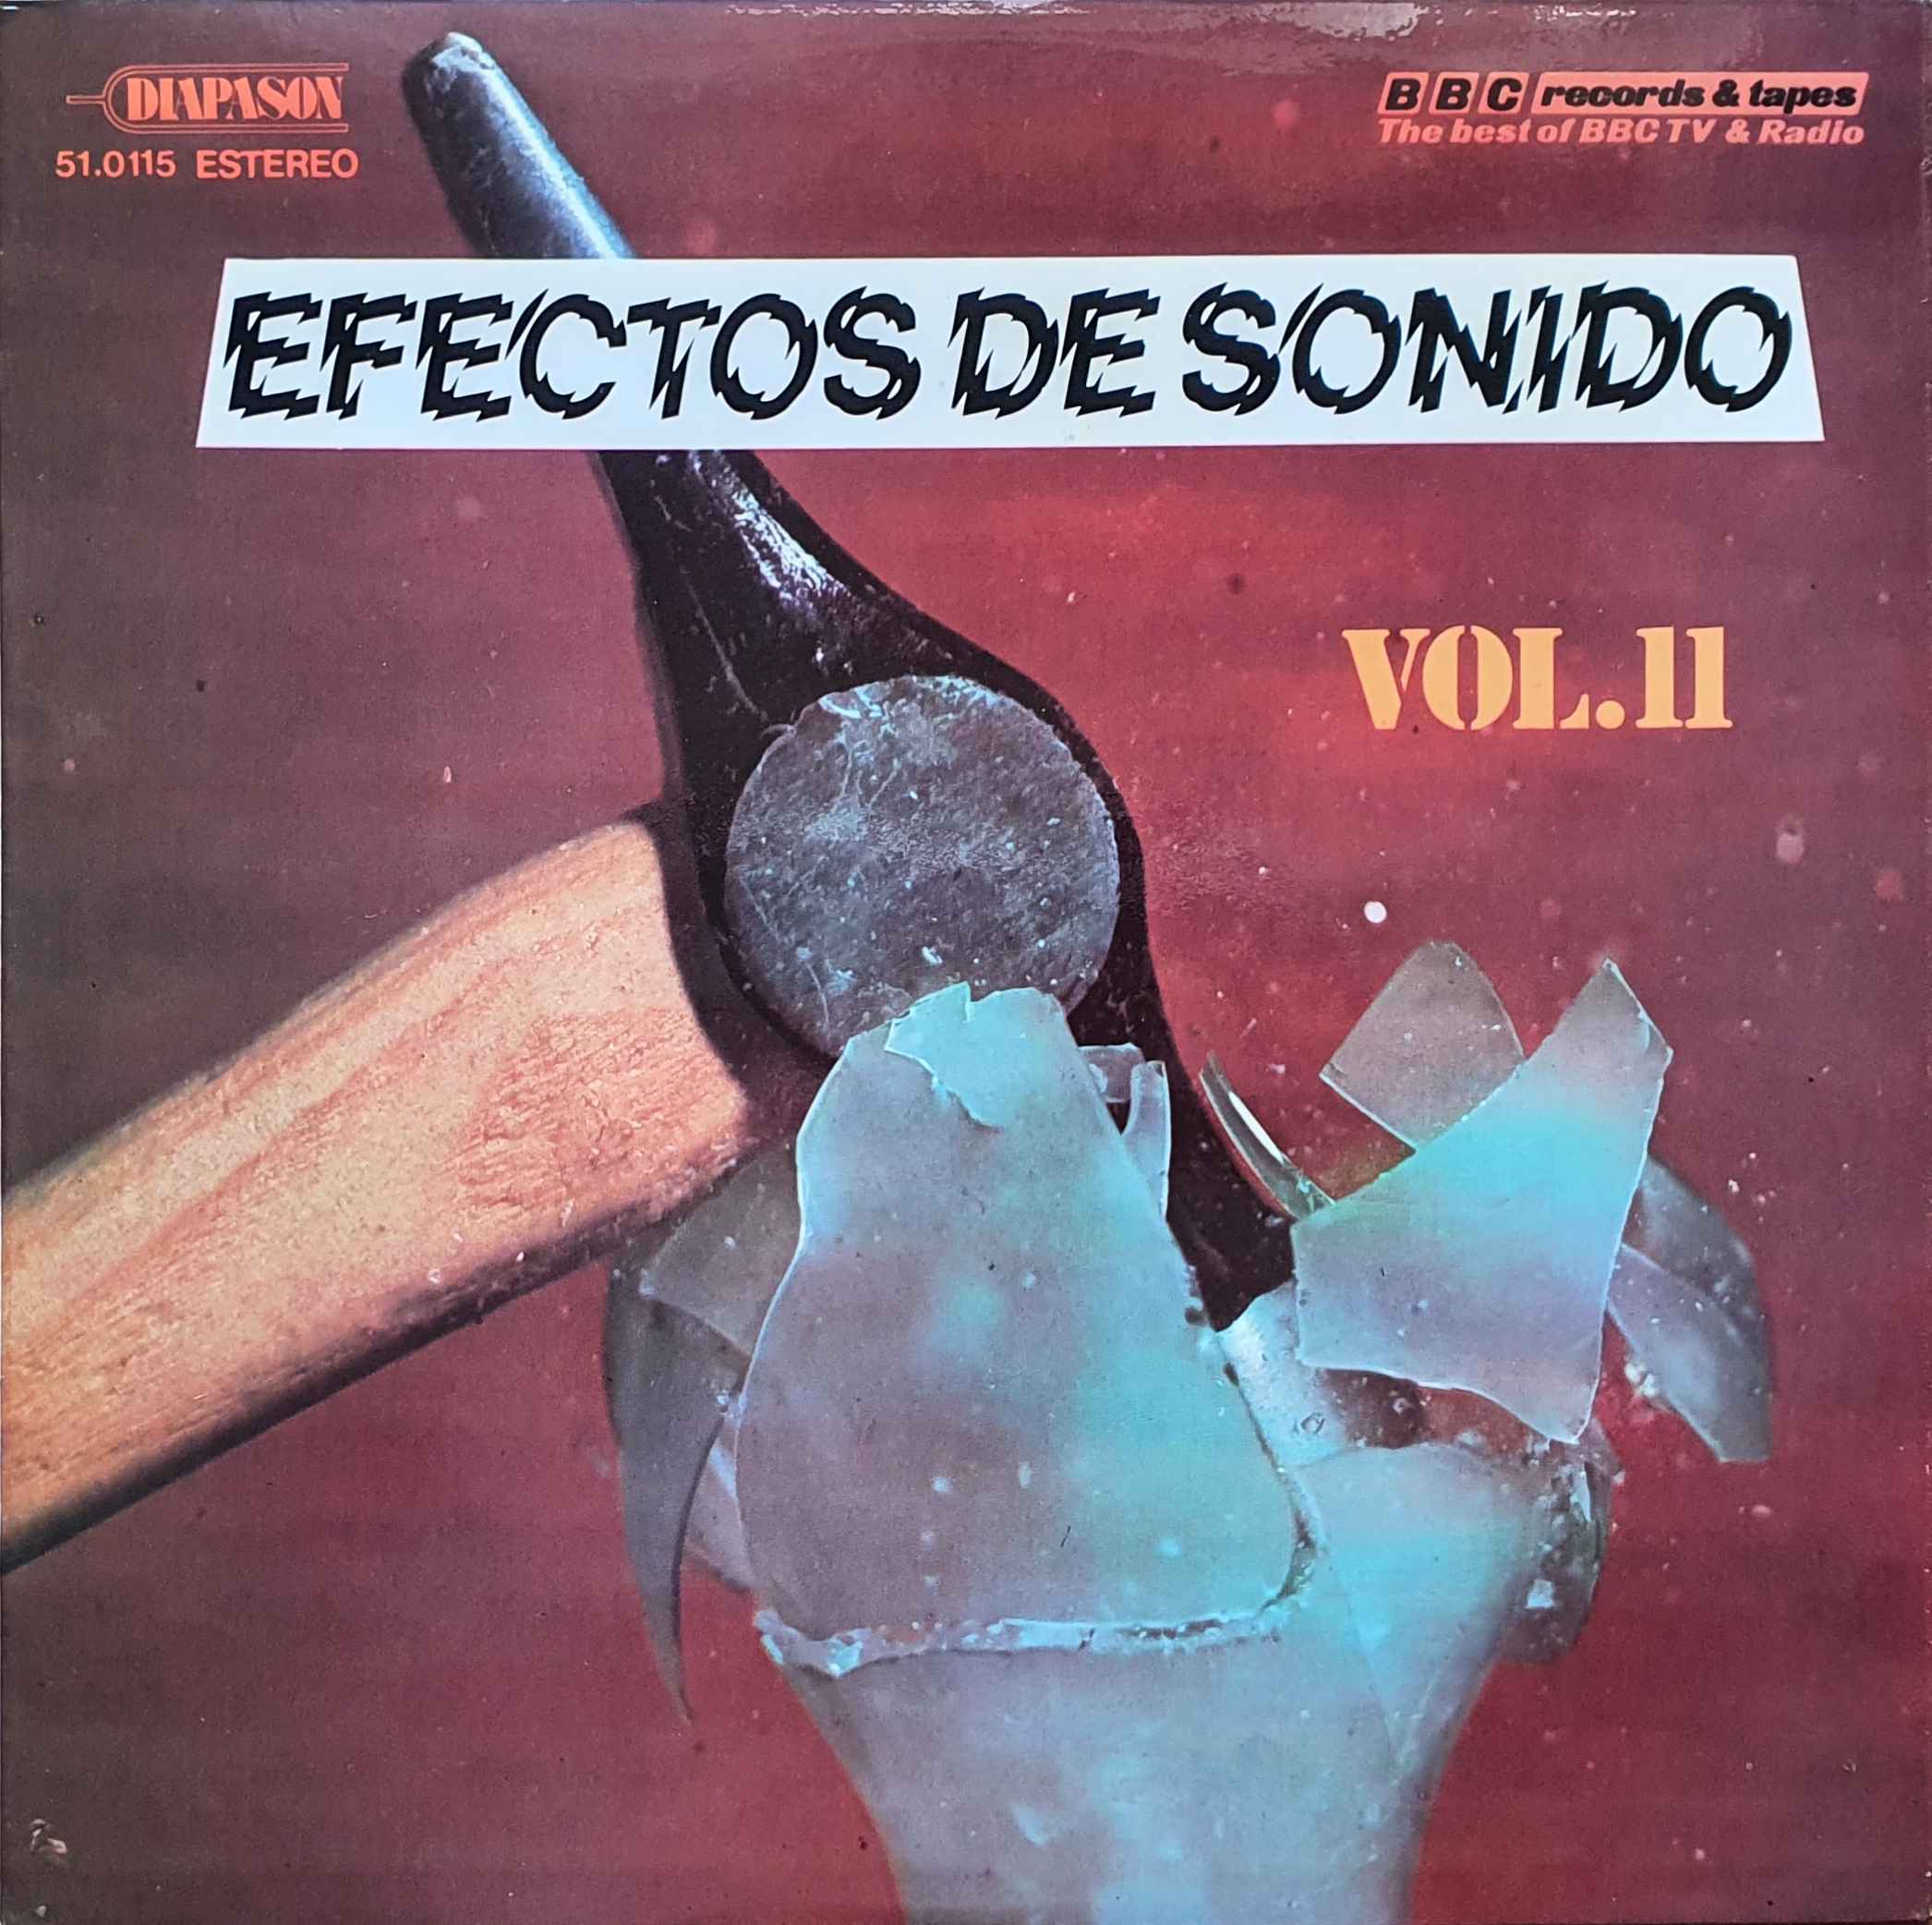 Picture of 51.0115 Efectos De Sonido Vol.11 - 1982 - Diapason (Spanish import) by artist Various from the BBC albums - Records and Tapes library